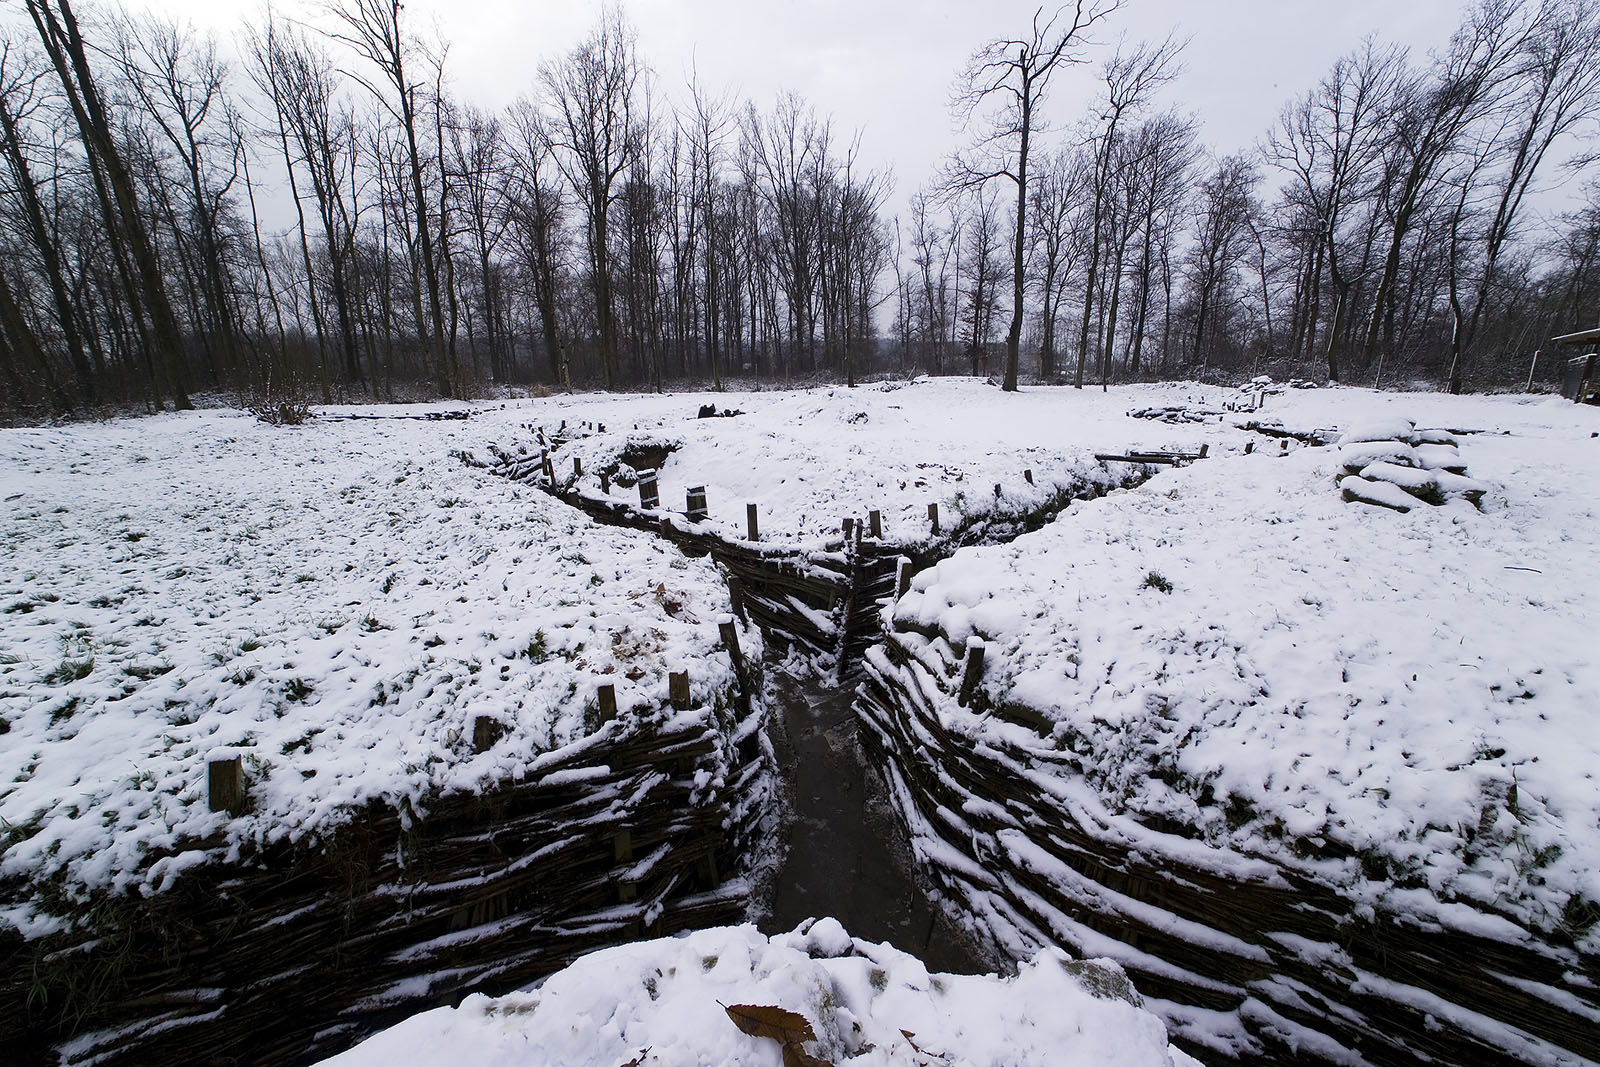 Modern photograph. An X-shaped trench carves through a snowy field with barren trees in the background.